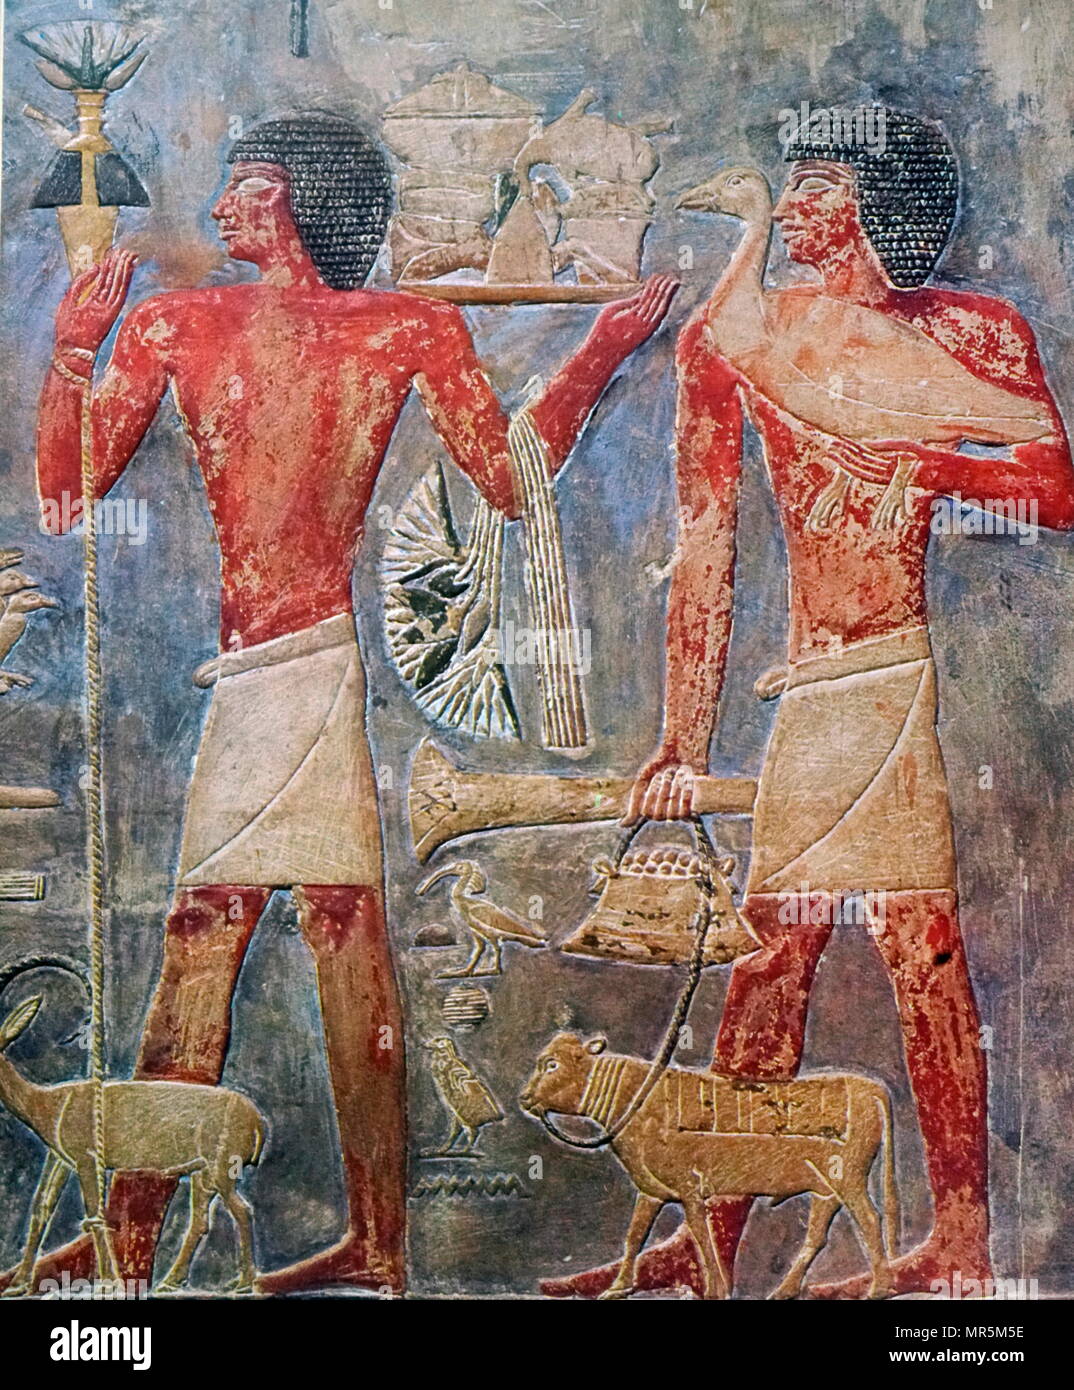 Egyptian tomb painting showing men carrying food as offerings to the Gods. From the Tomb of Ti at Saqqara. well-preserved Mastaba of Ti is located at the northern edge of the Saqqara necropolis, about 300m north of the ‘Philosopher’s Circle’. Ti held the titles of ‘Overseer of the Pyramids of Niuserre’, and ‘Overseer of the Sun-Temples of Sahure. Old Kingdom circa 2690 to 2190. Stock Photo